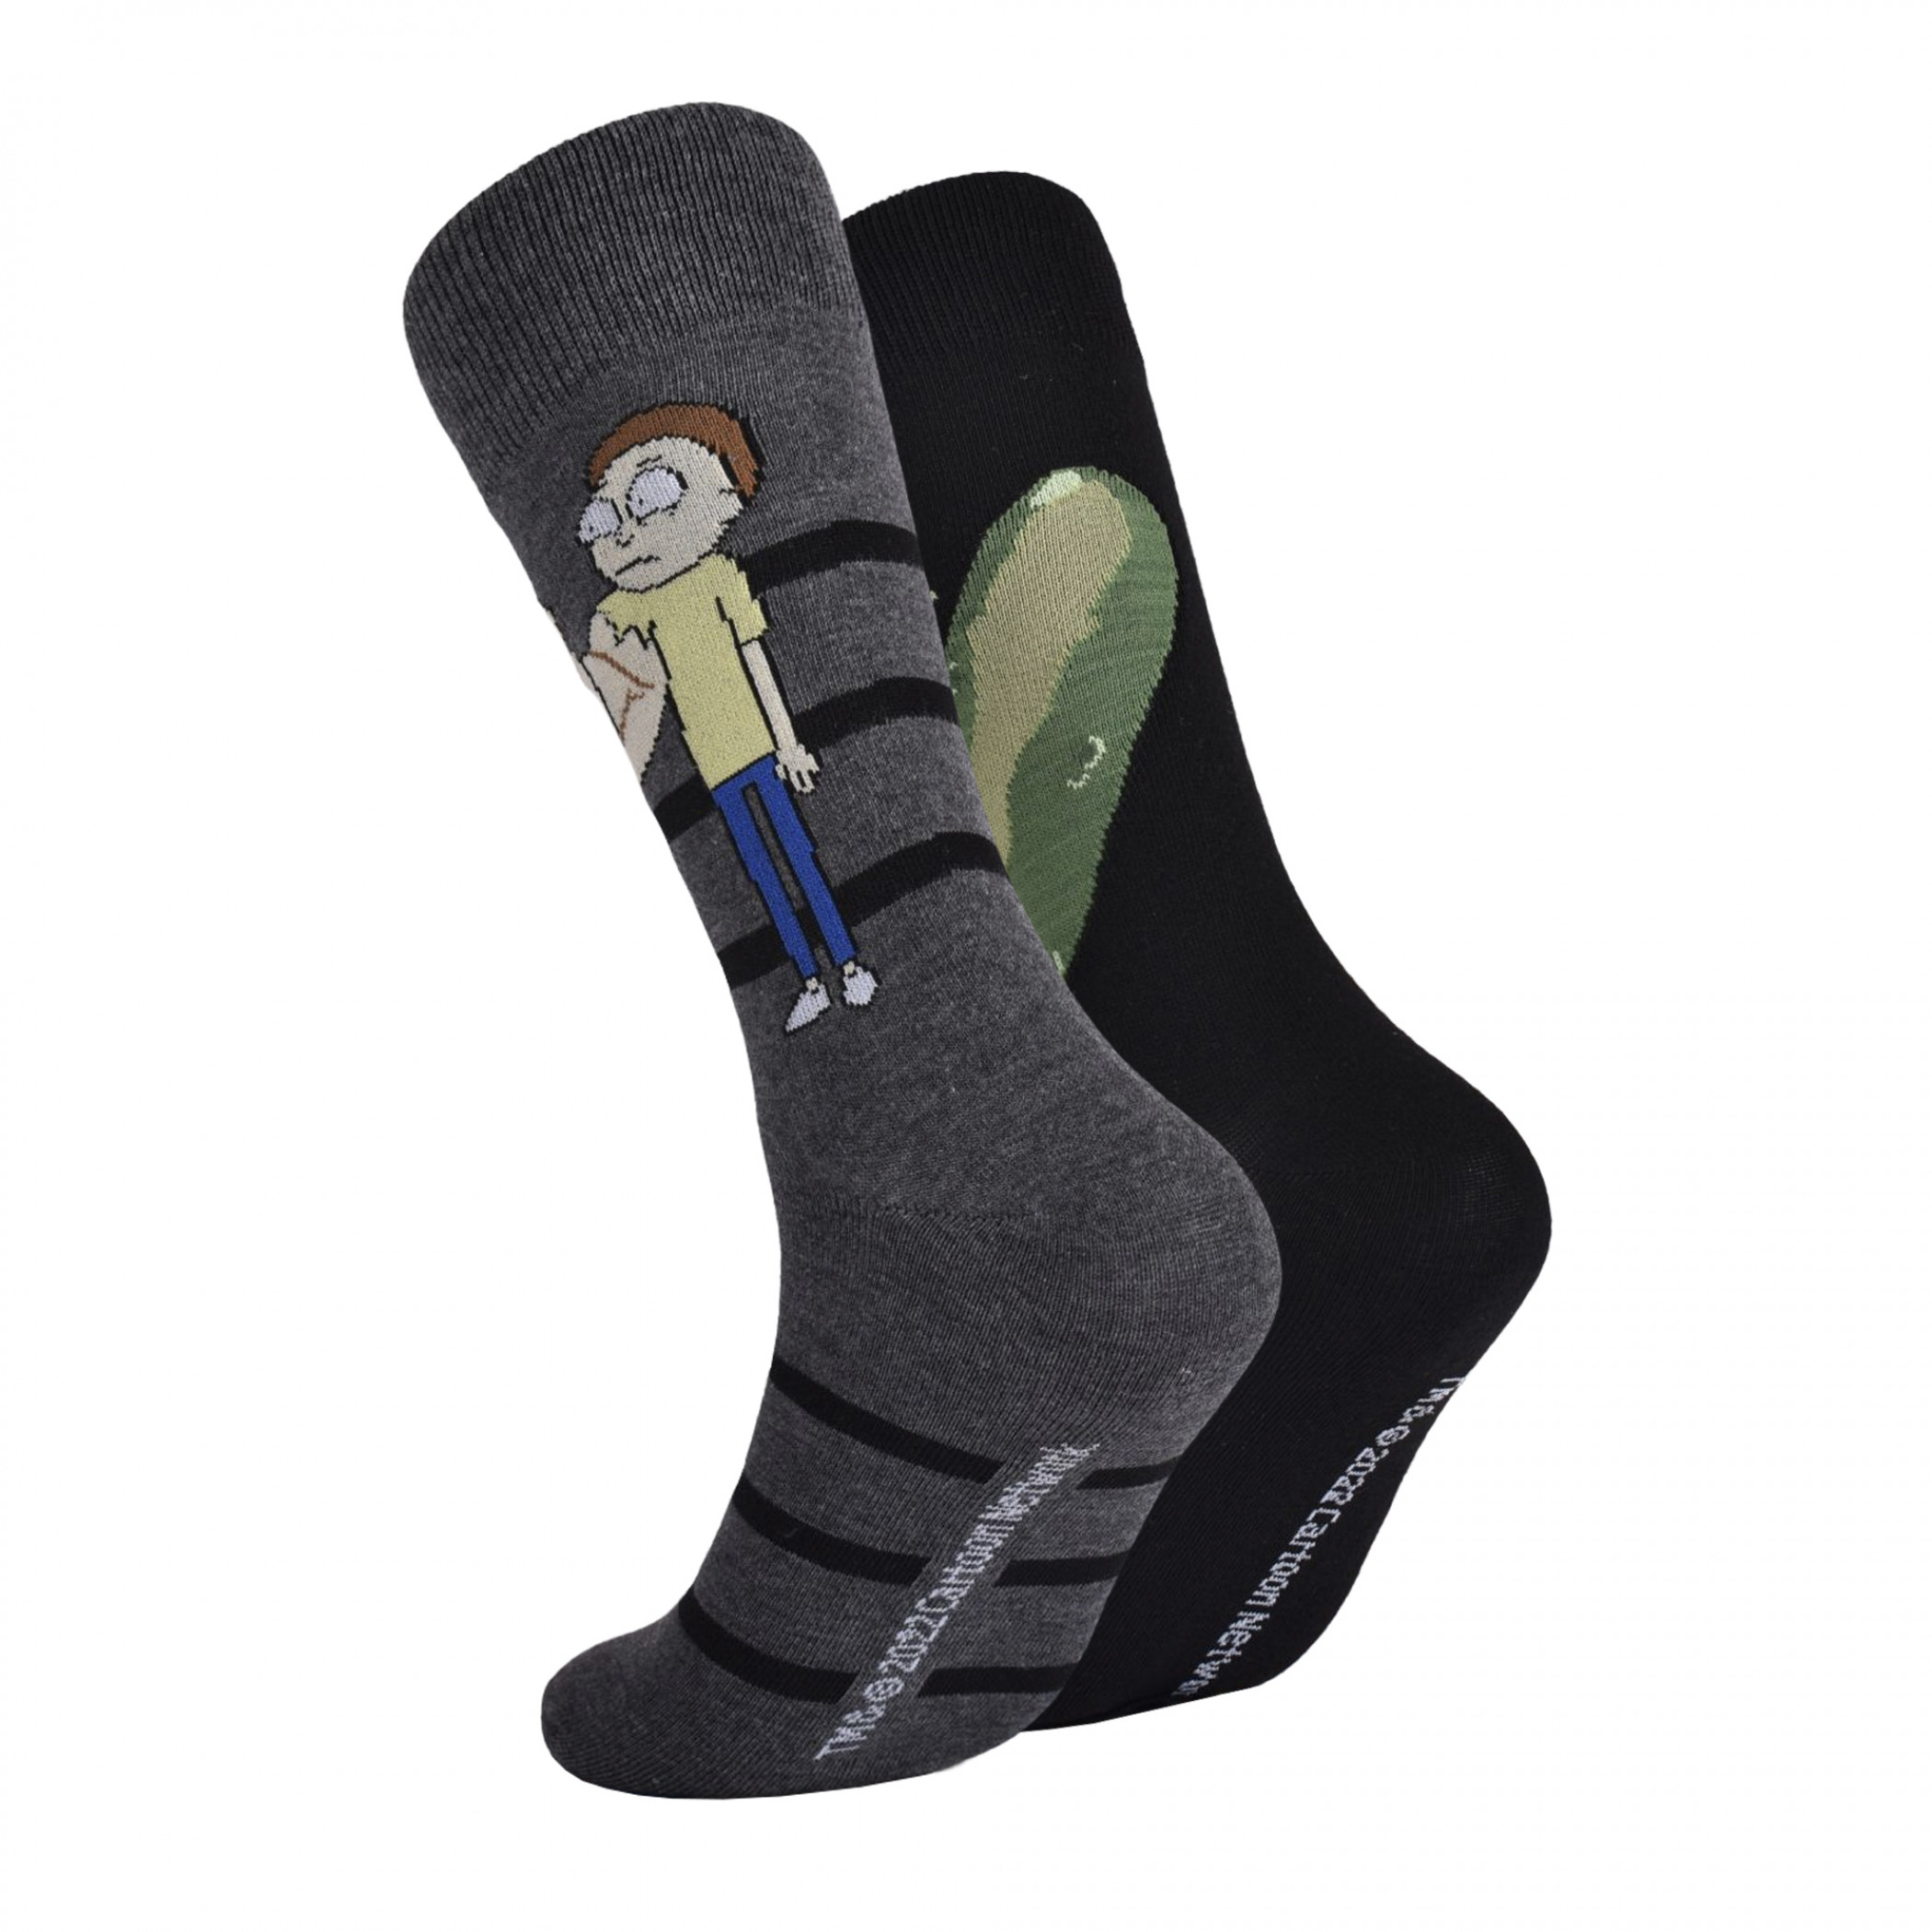 Rick and Morty Pickle Rick Underwear and Crew Socks Boxed Set